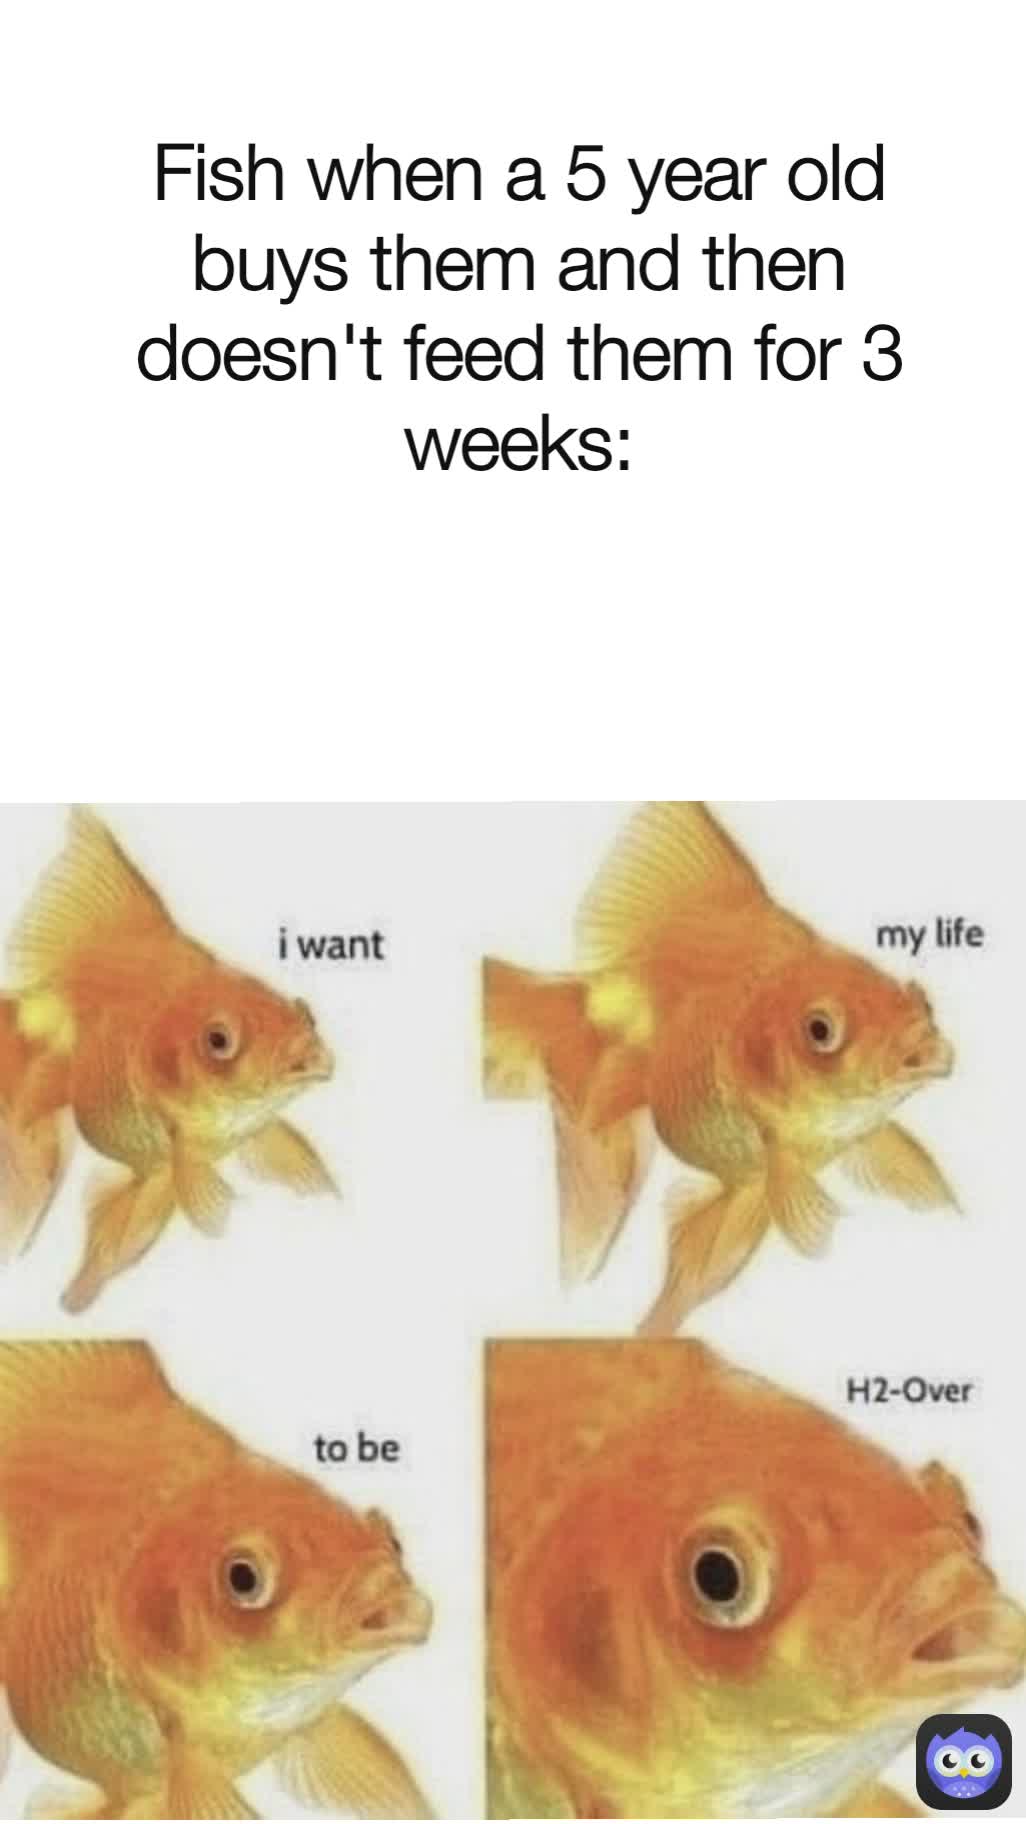 Fish when a 5 year old buys them and then doesn't feed them for 3 weeks: